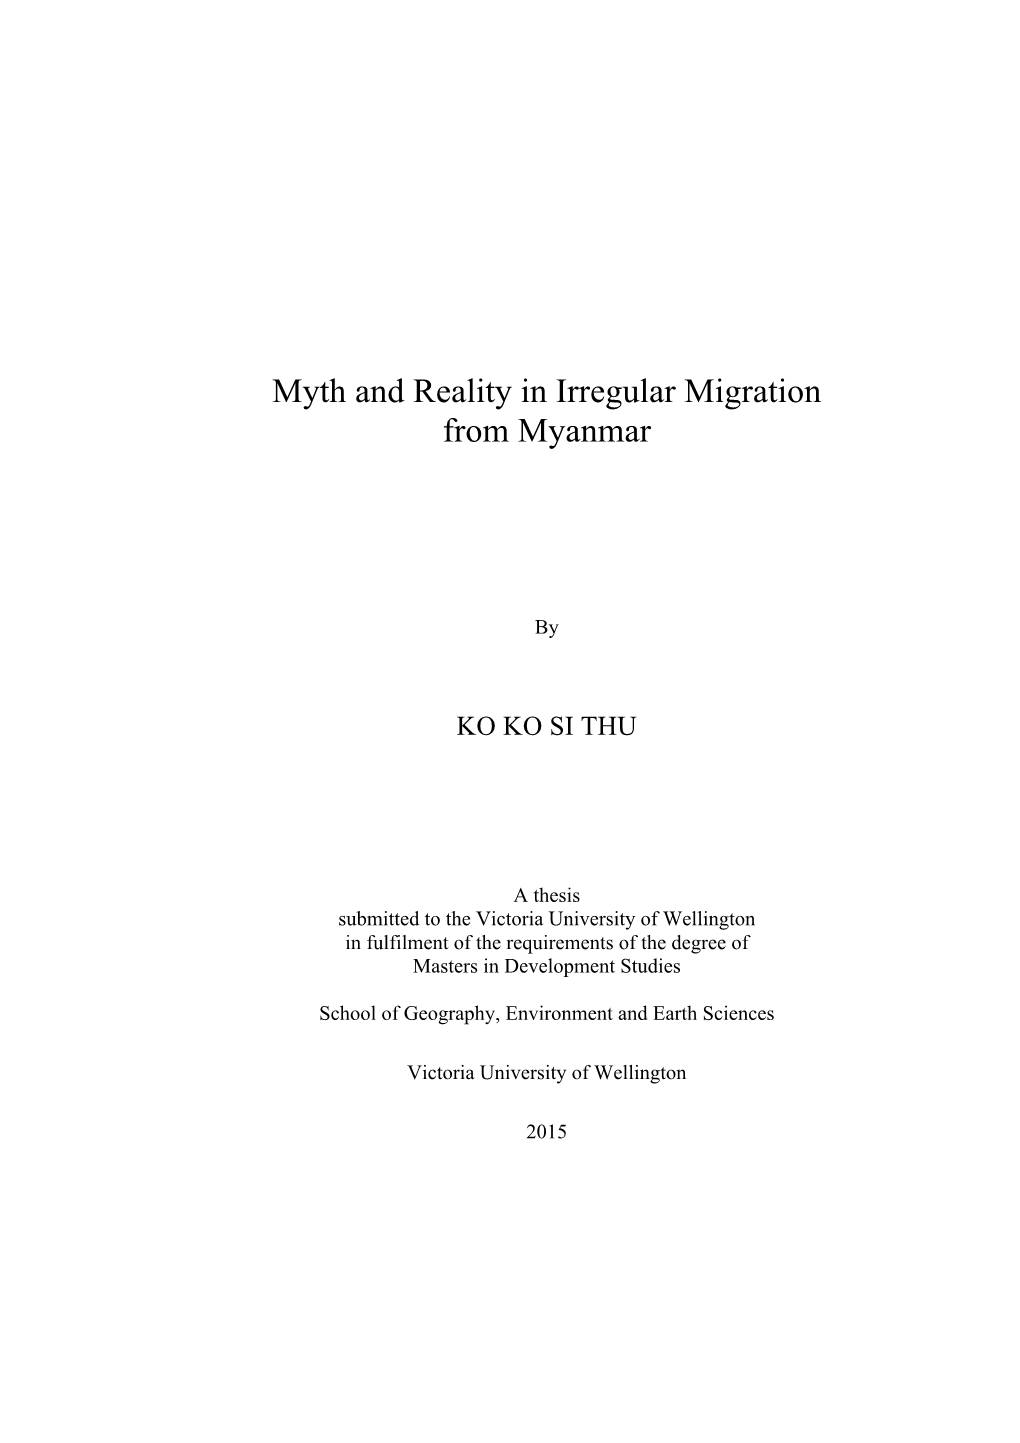 Myth and Reality in Irregular Migration from Myanmar